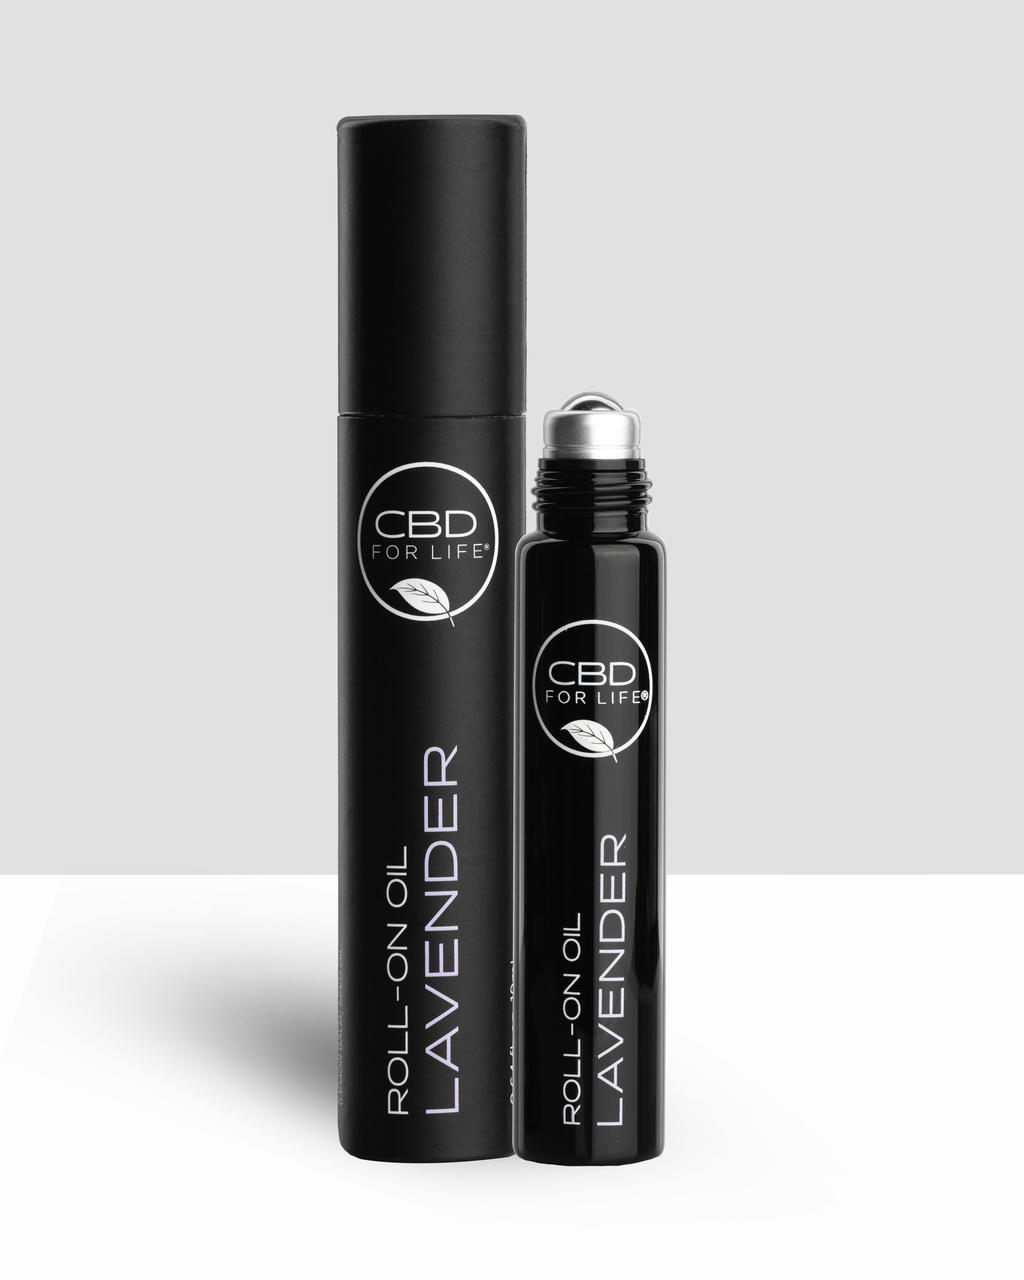 Our CBD Oil roll-on applies clear, absorbs quickly and delivers pinpointed, targeted results. Roll it anywhere—over temples, knees, fingers or toes—for soothing comfort, on the spot. Our roll-on oil is a combination of CBD oil plus other beneficial oils, like coconut oil, hemp seed oil and jojoba oil, to name a few.